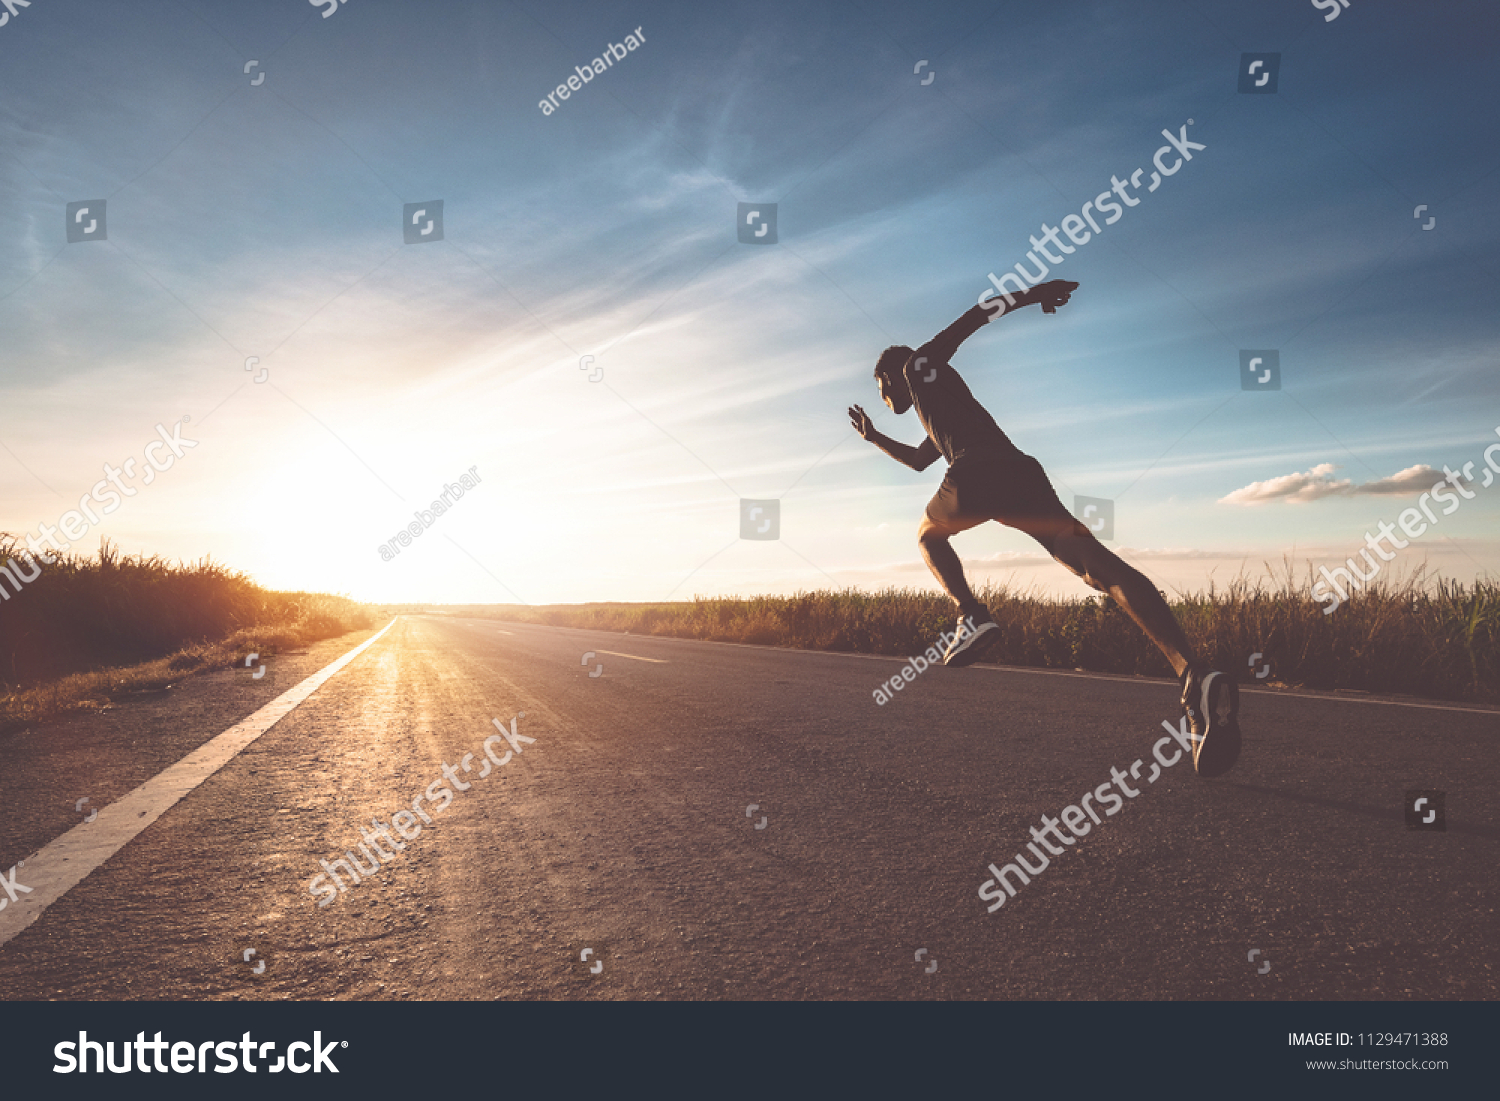 The man with runner on the street be running for exercise. #1129471388